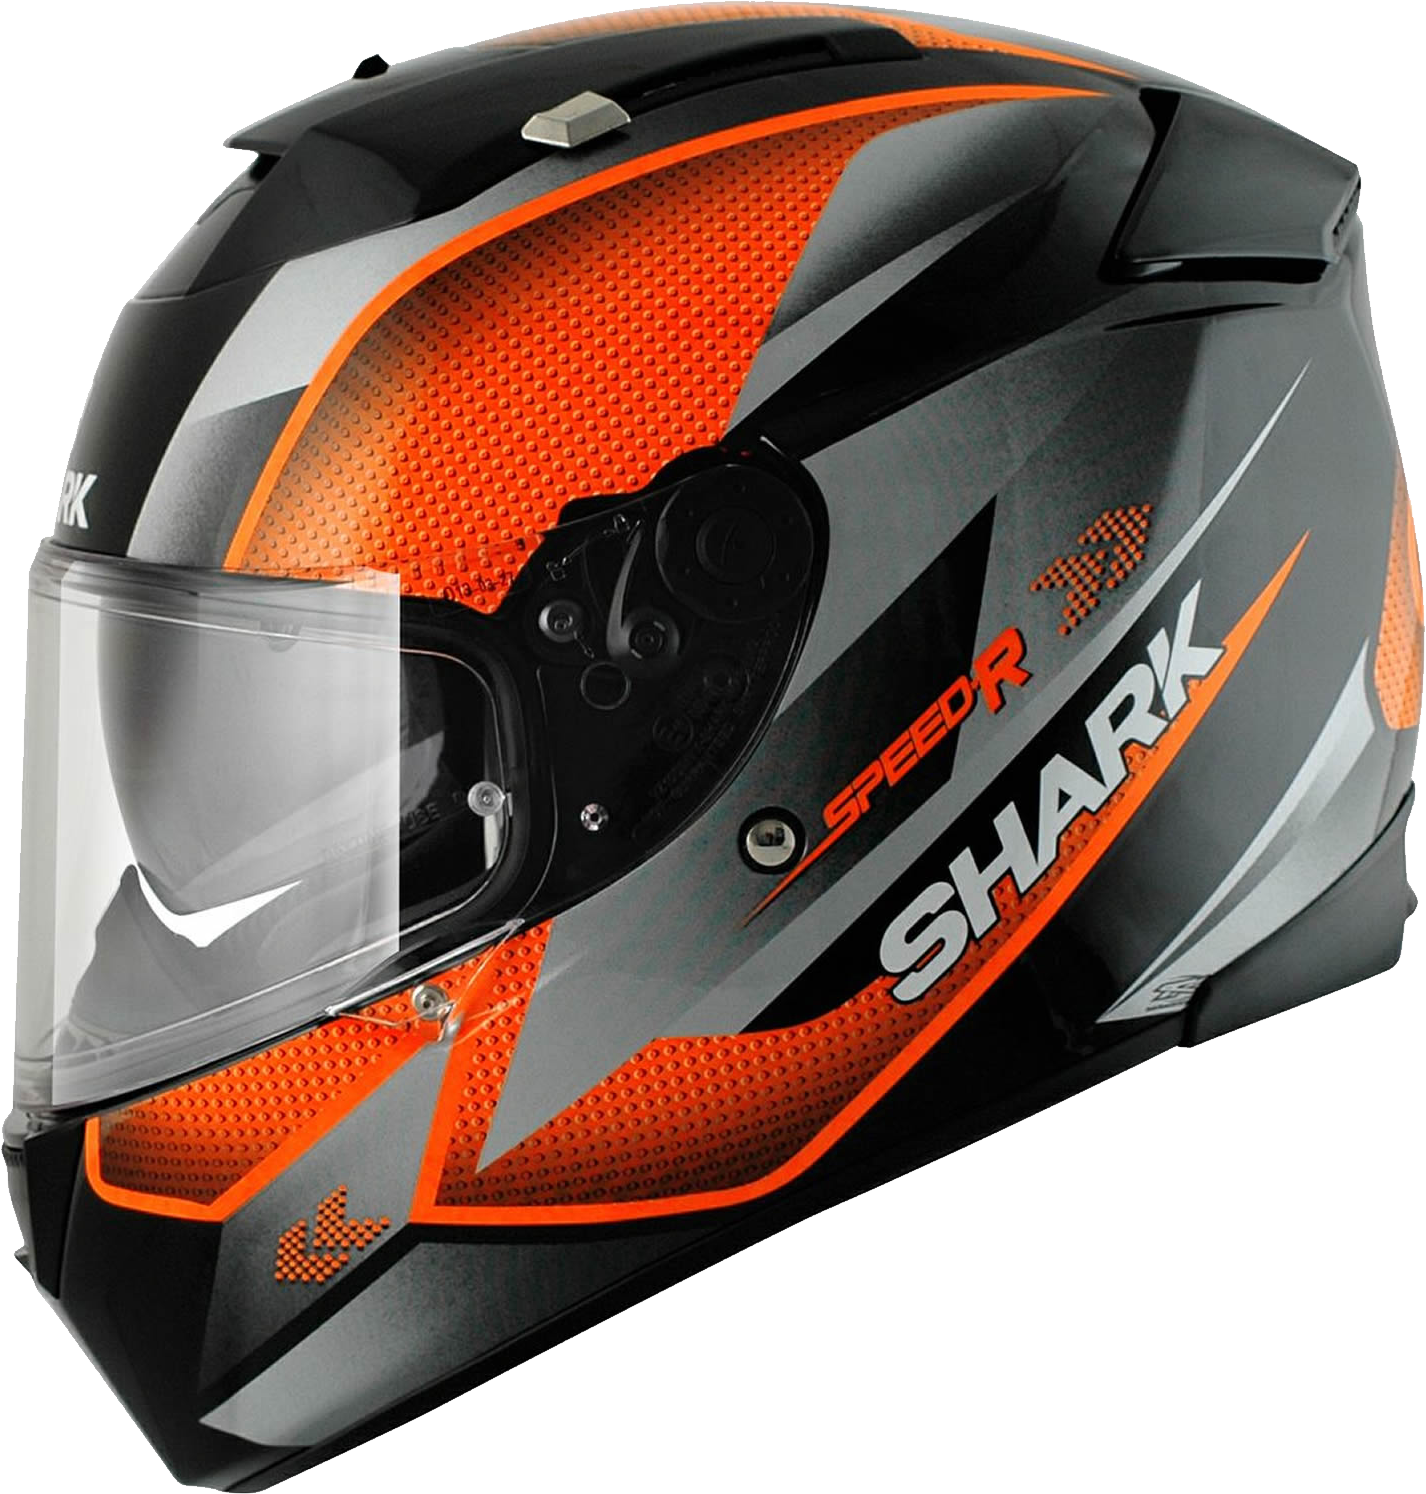 Helm PNG Beeld Transparant